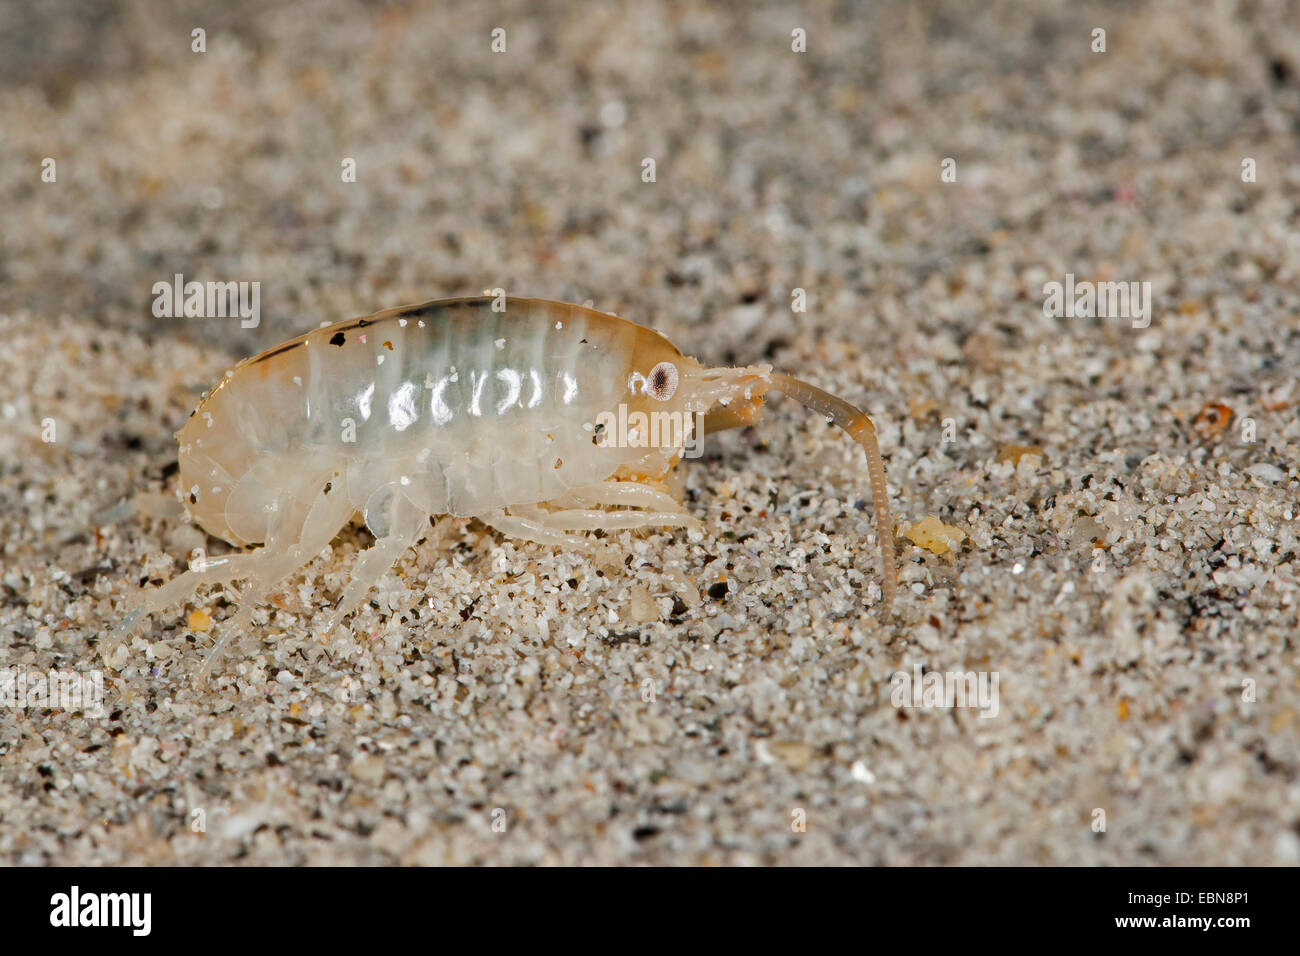 Sand hopper, Sand-hopper, Sandhopper, Greater sandhopper (Talitrus saltator, Talitrus locusta, Talitrus littoralis), washed up on the sand coast, living between and under algae, Germany Stock Photo